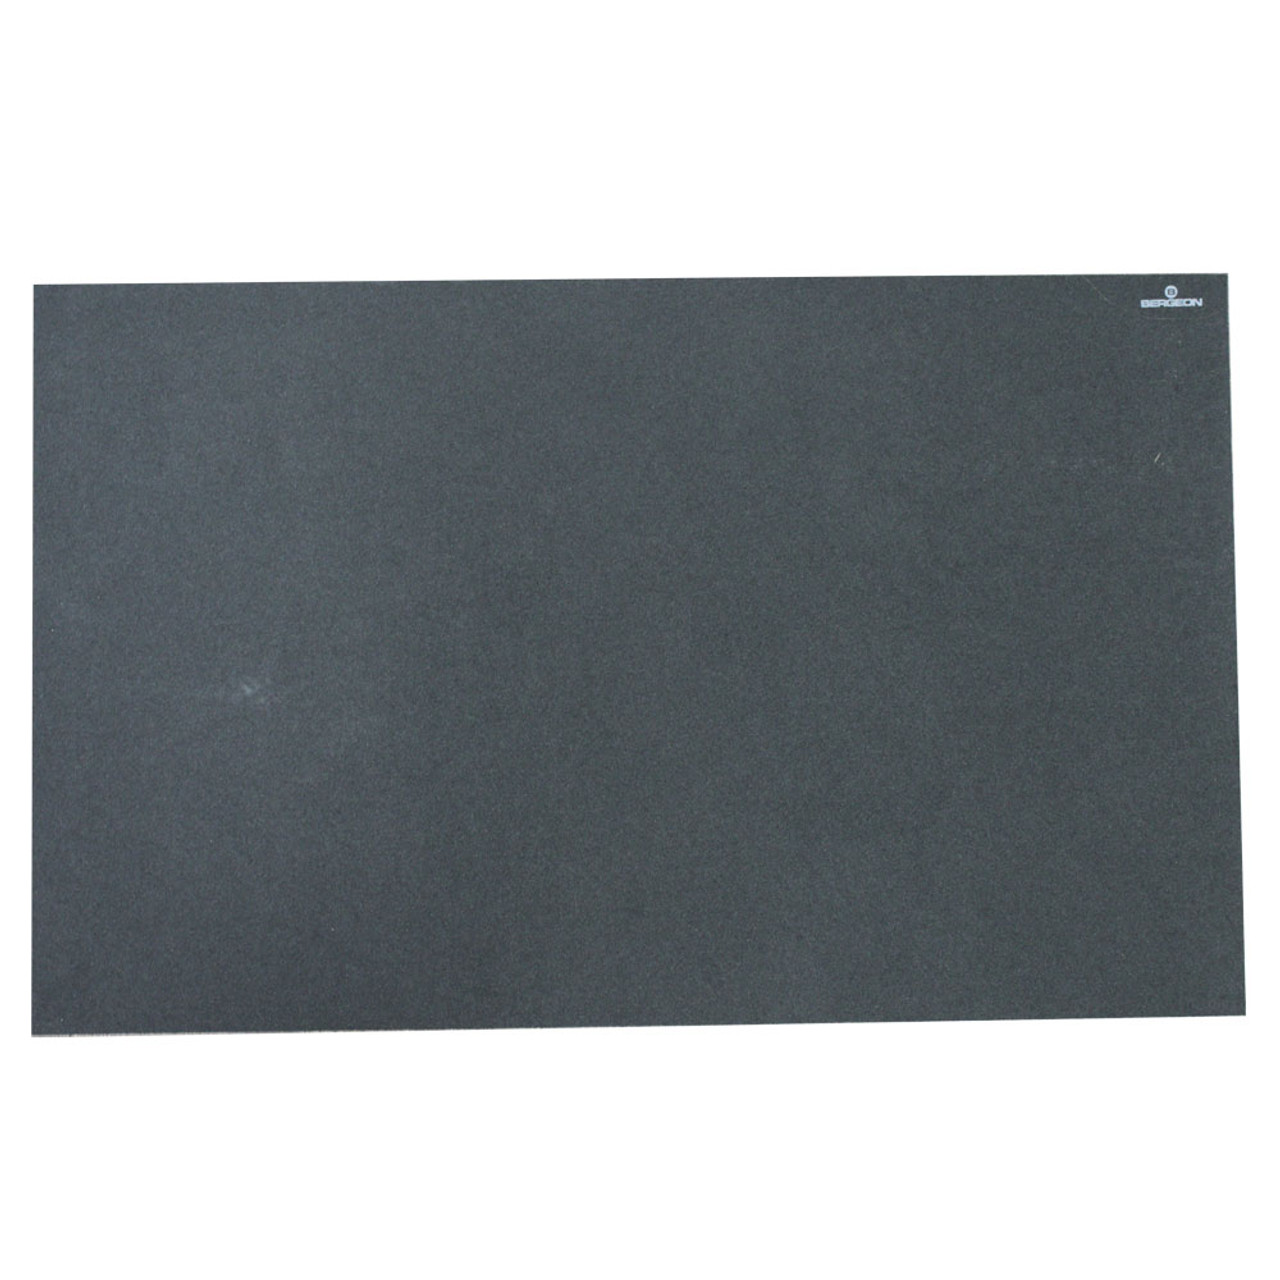 Bergeon Green 6808 Work Pad Bench Mat Plastic with Adhesive Backing 9.5 x 12.5 Inches | Esslinger